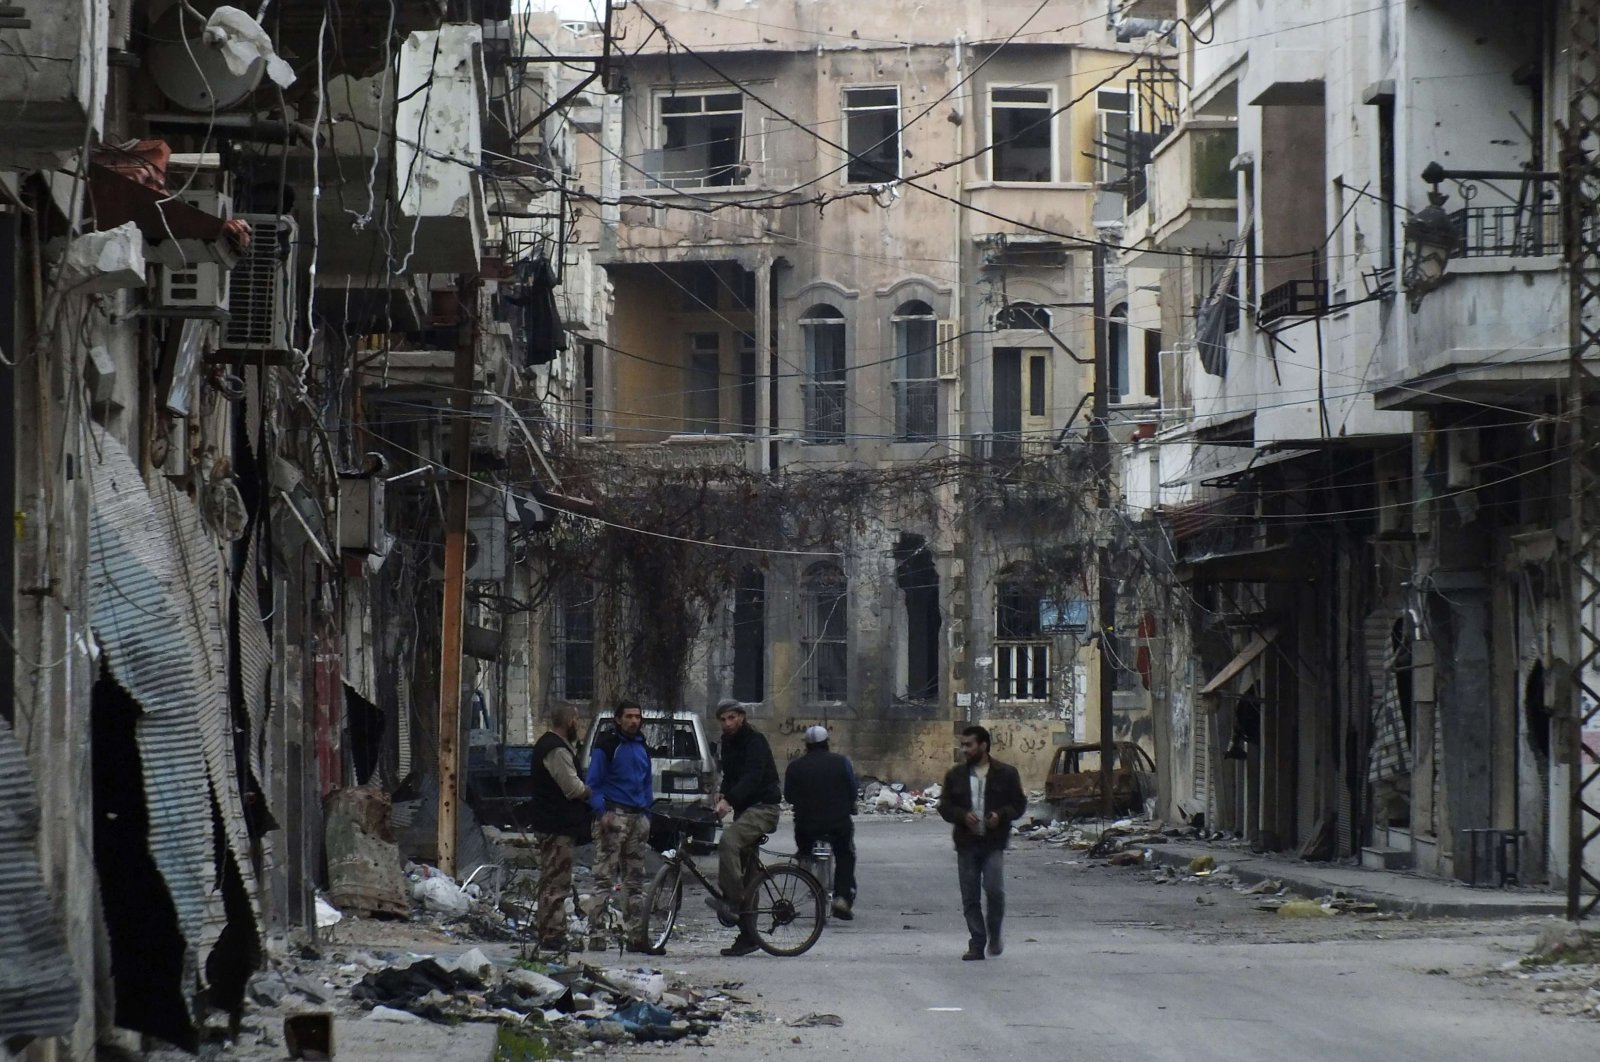 Men stand on a street lined with damaged buildings in the besieged area of Homs, Feb. 24, 2014, Syria. (Reuters Photo)